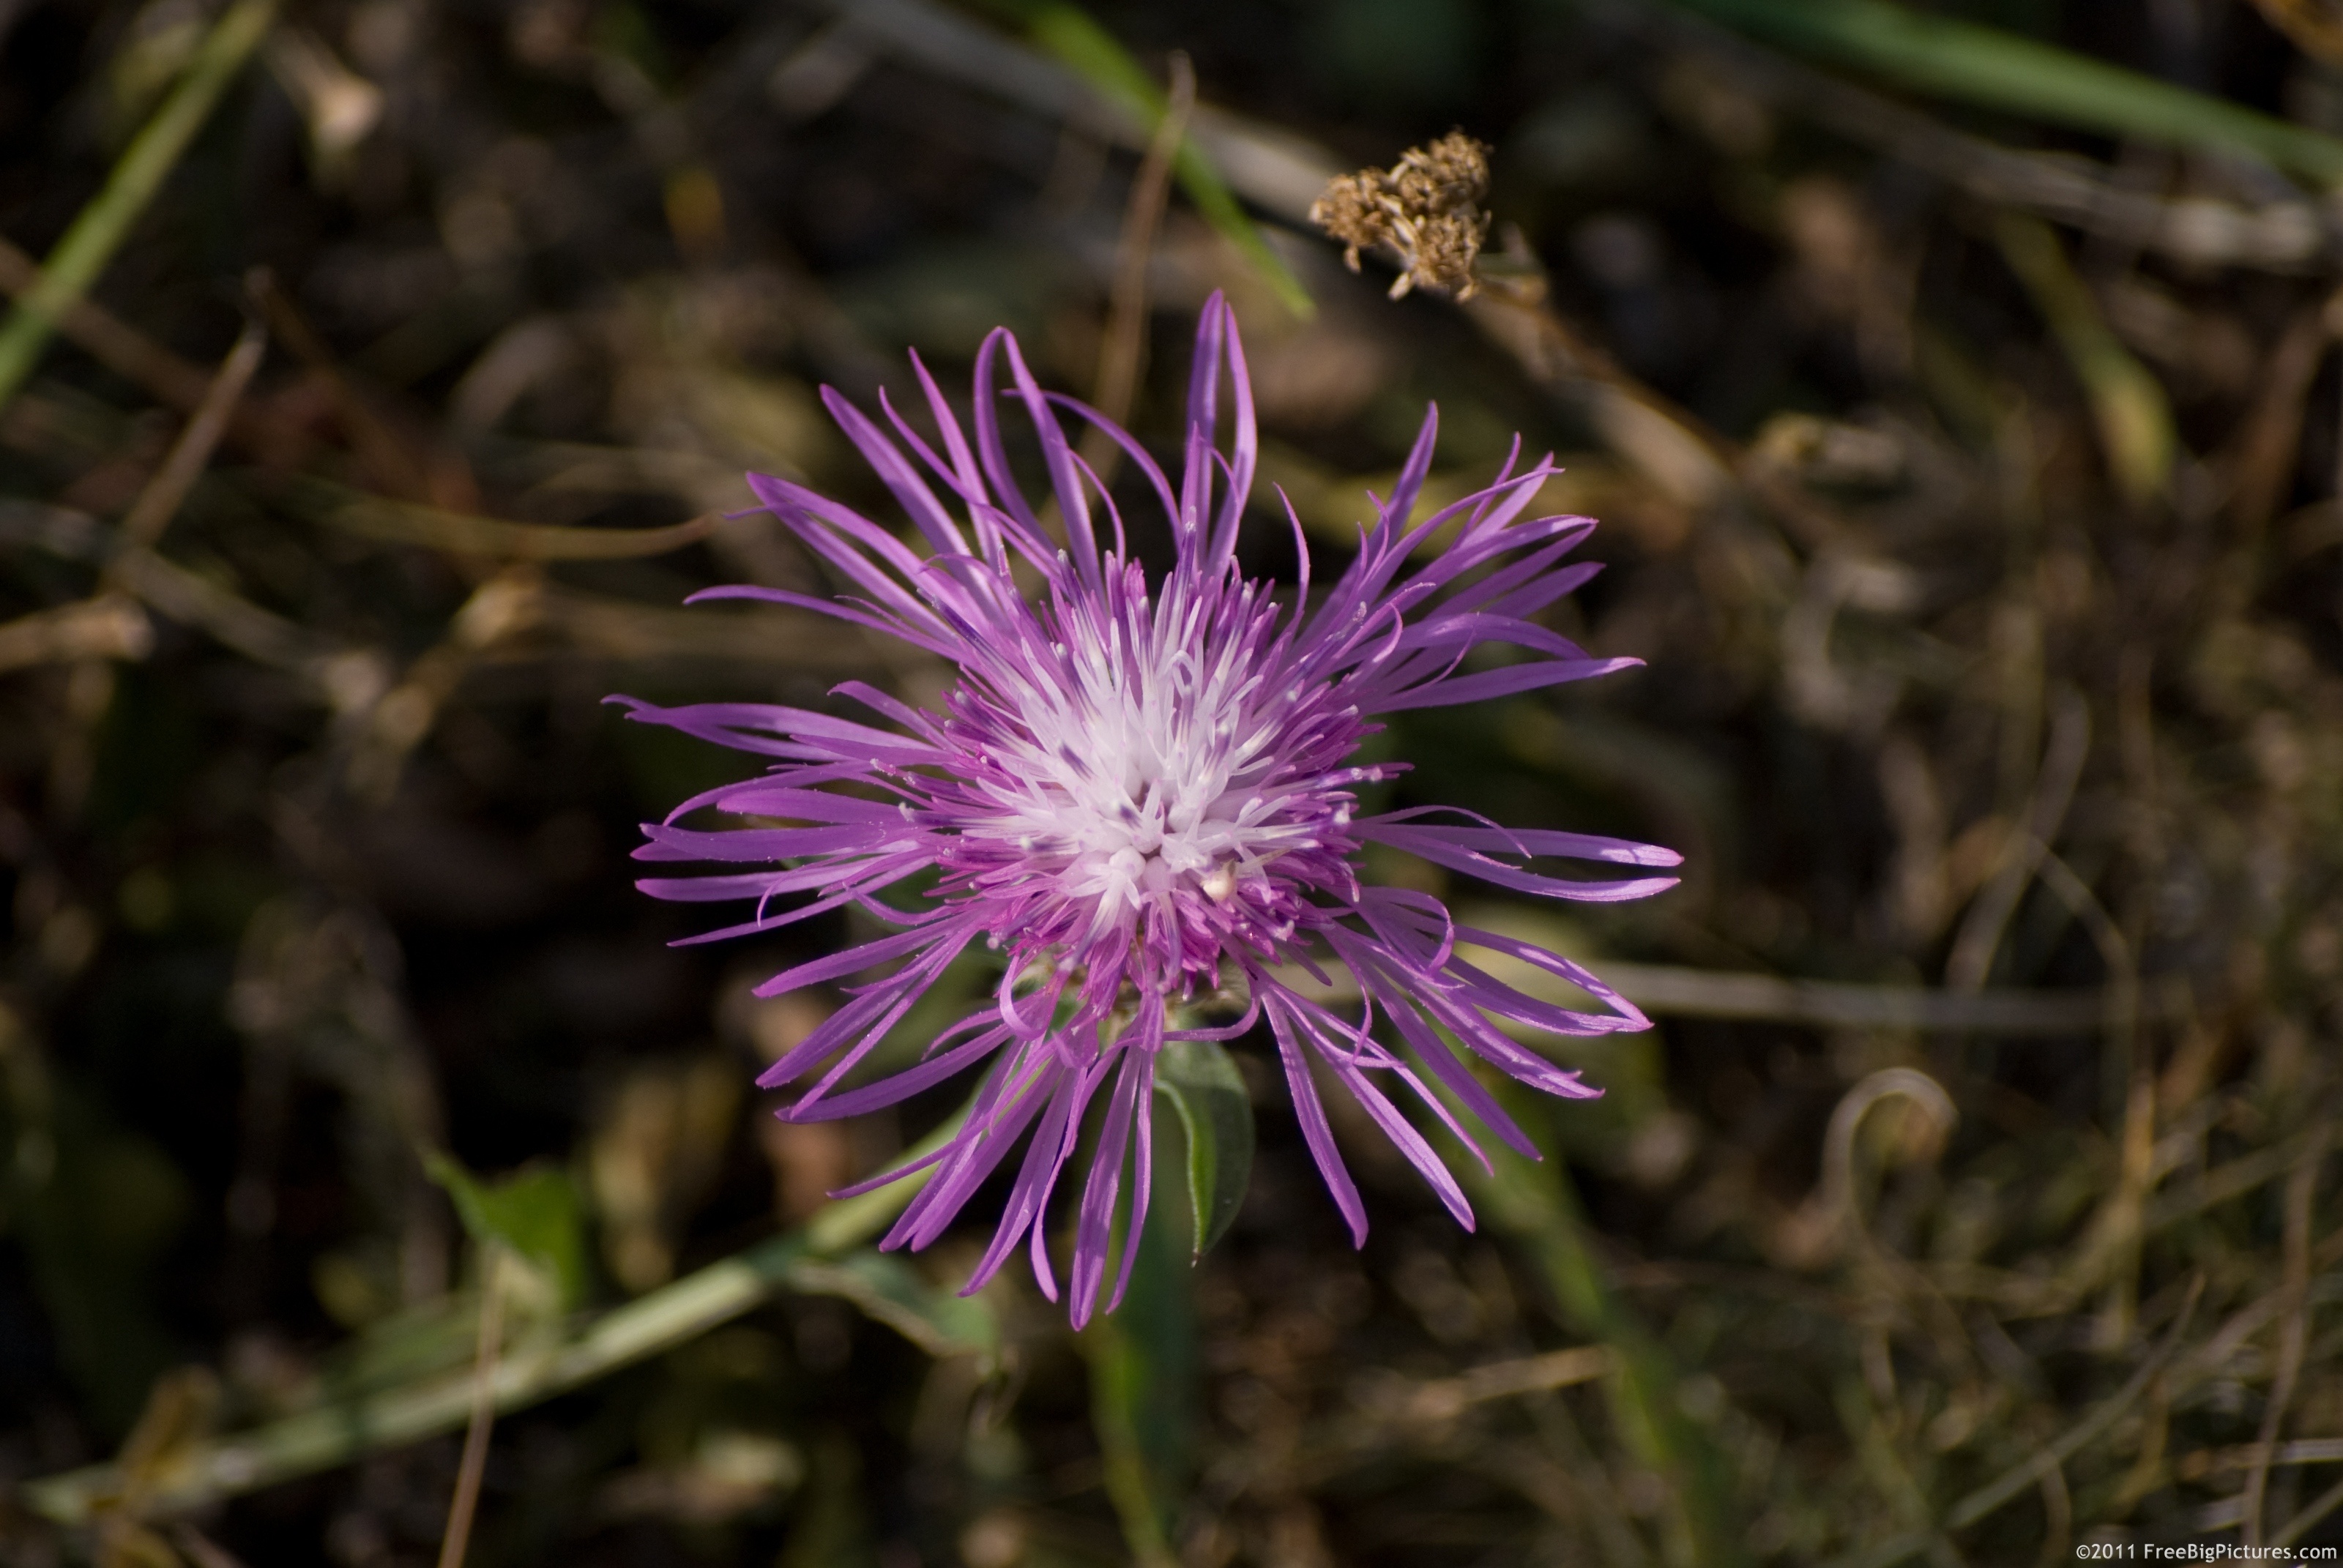 Knapweed, a plant with many flowers